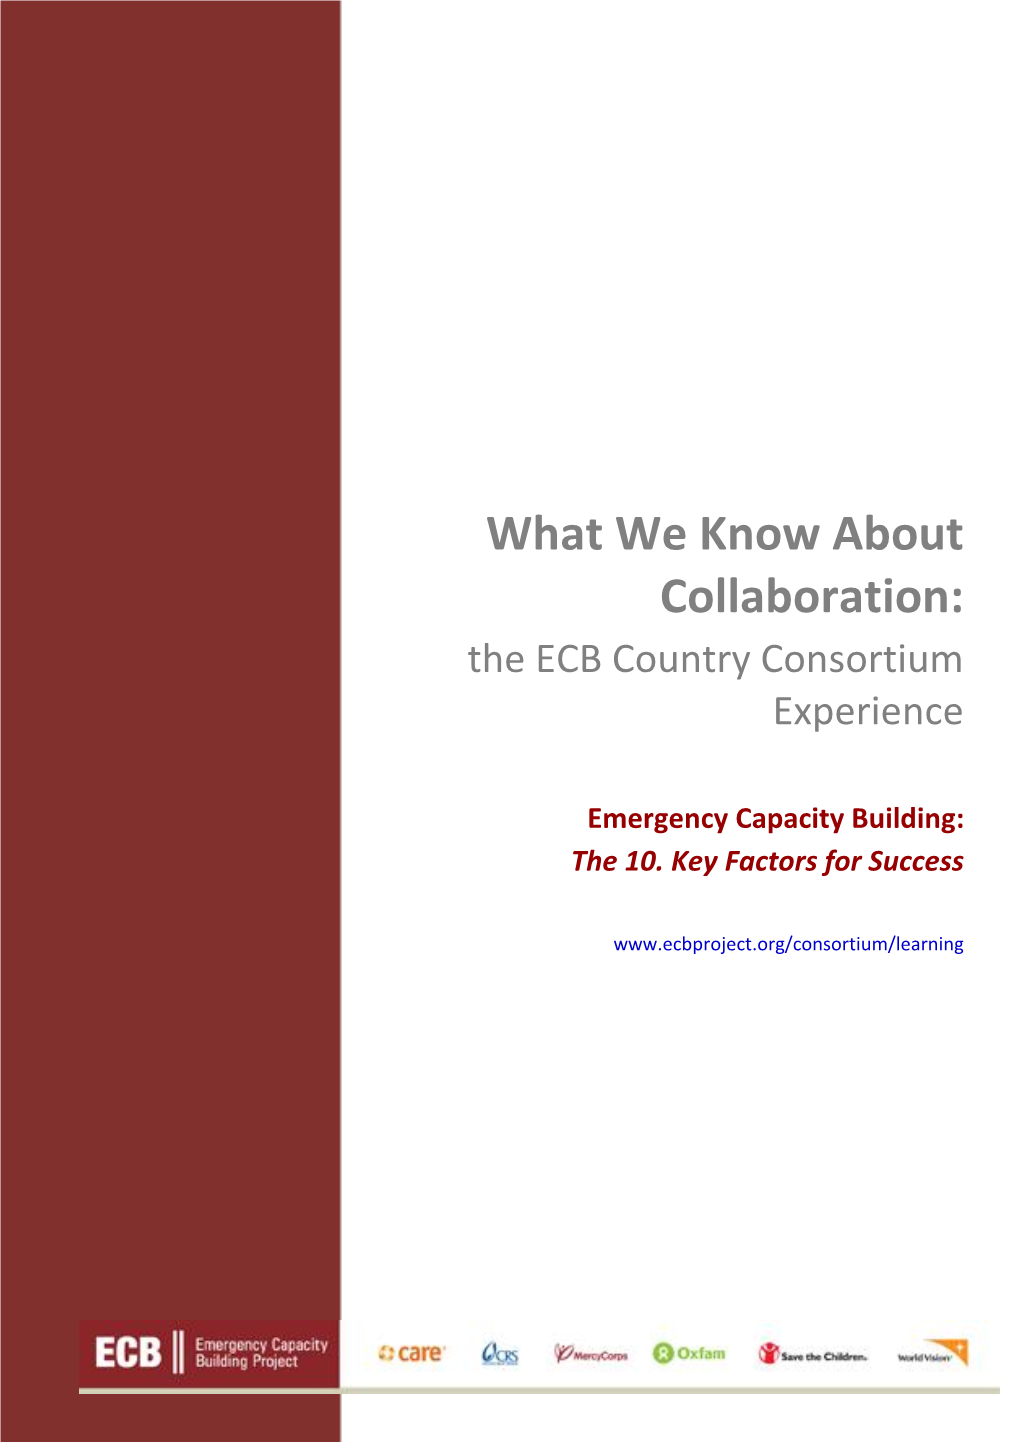 What We Know About Collaboration: the ECB Country Consortium Experience